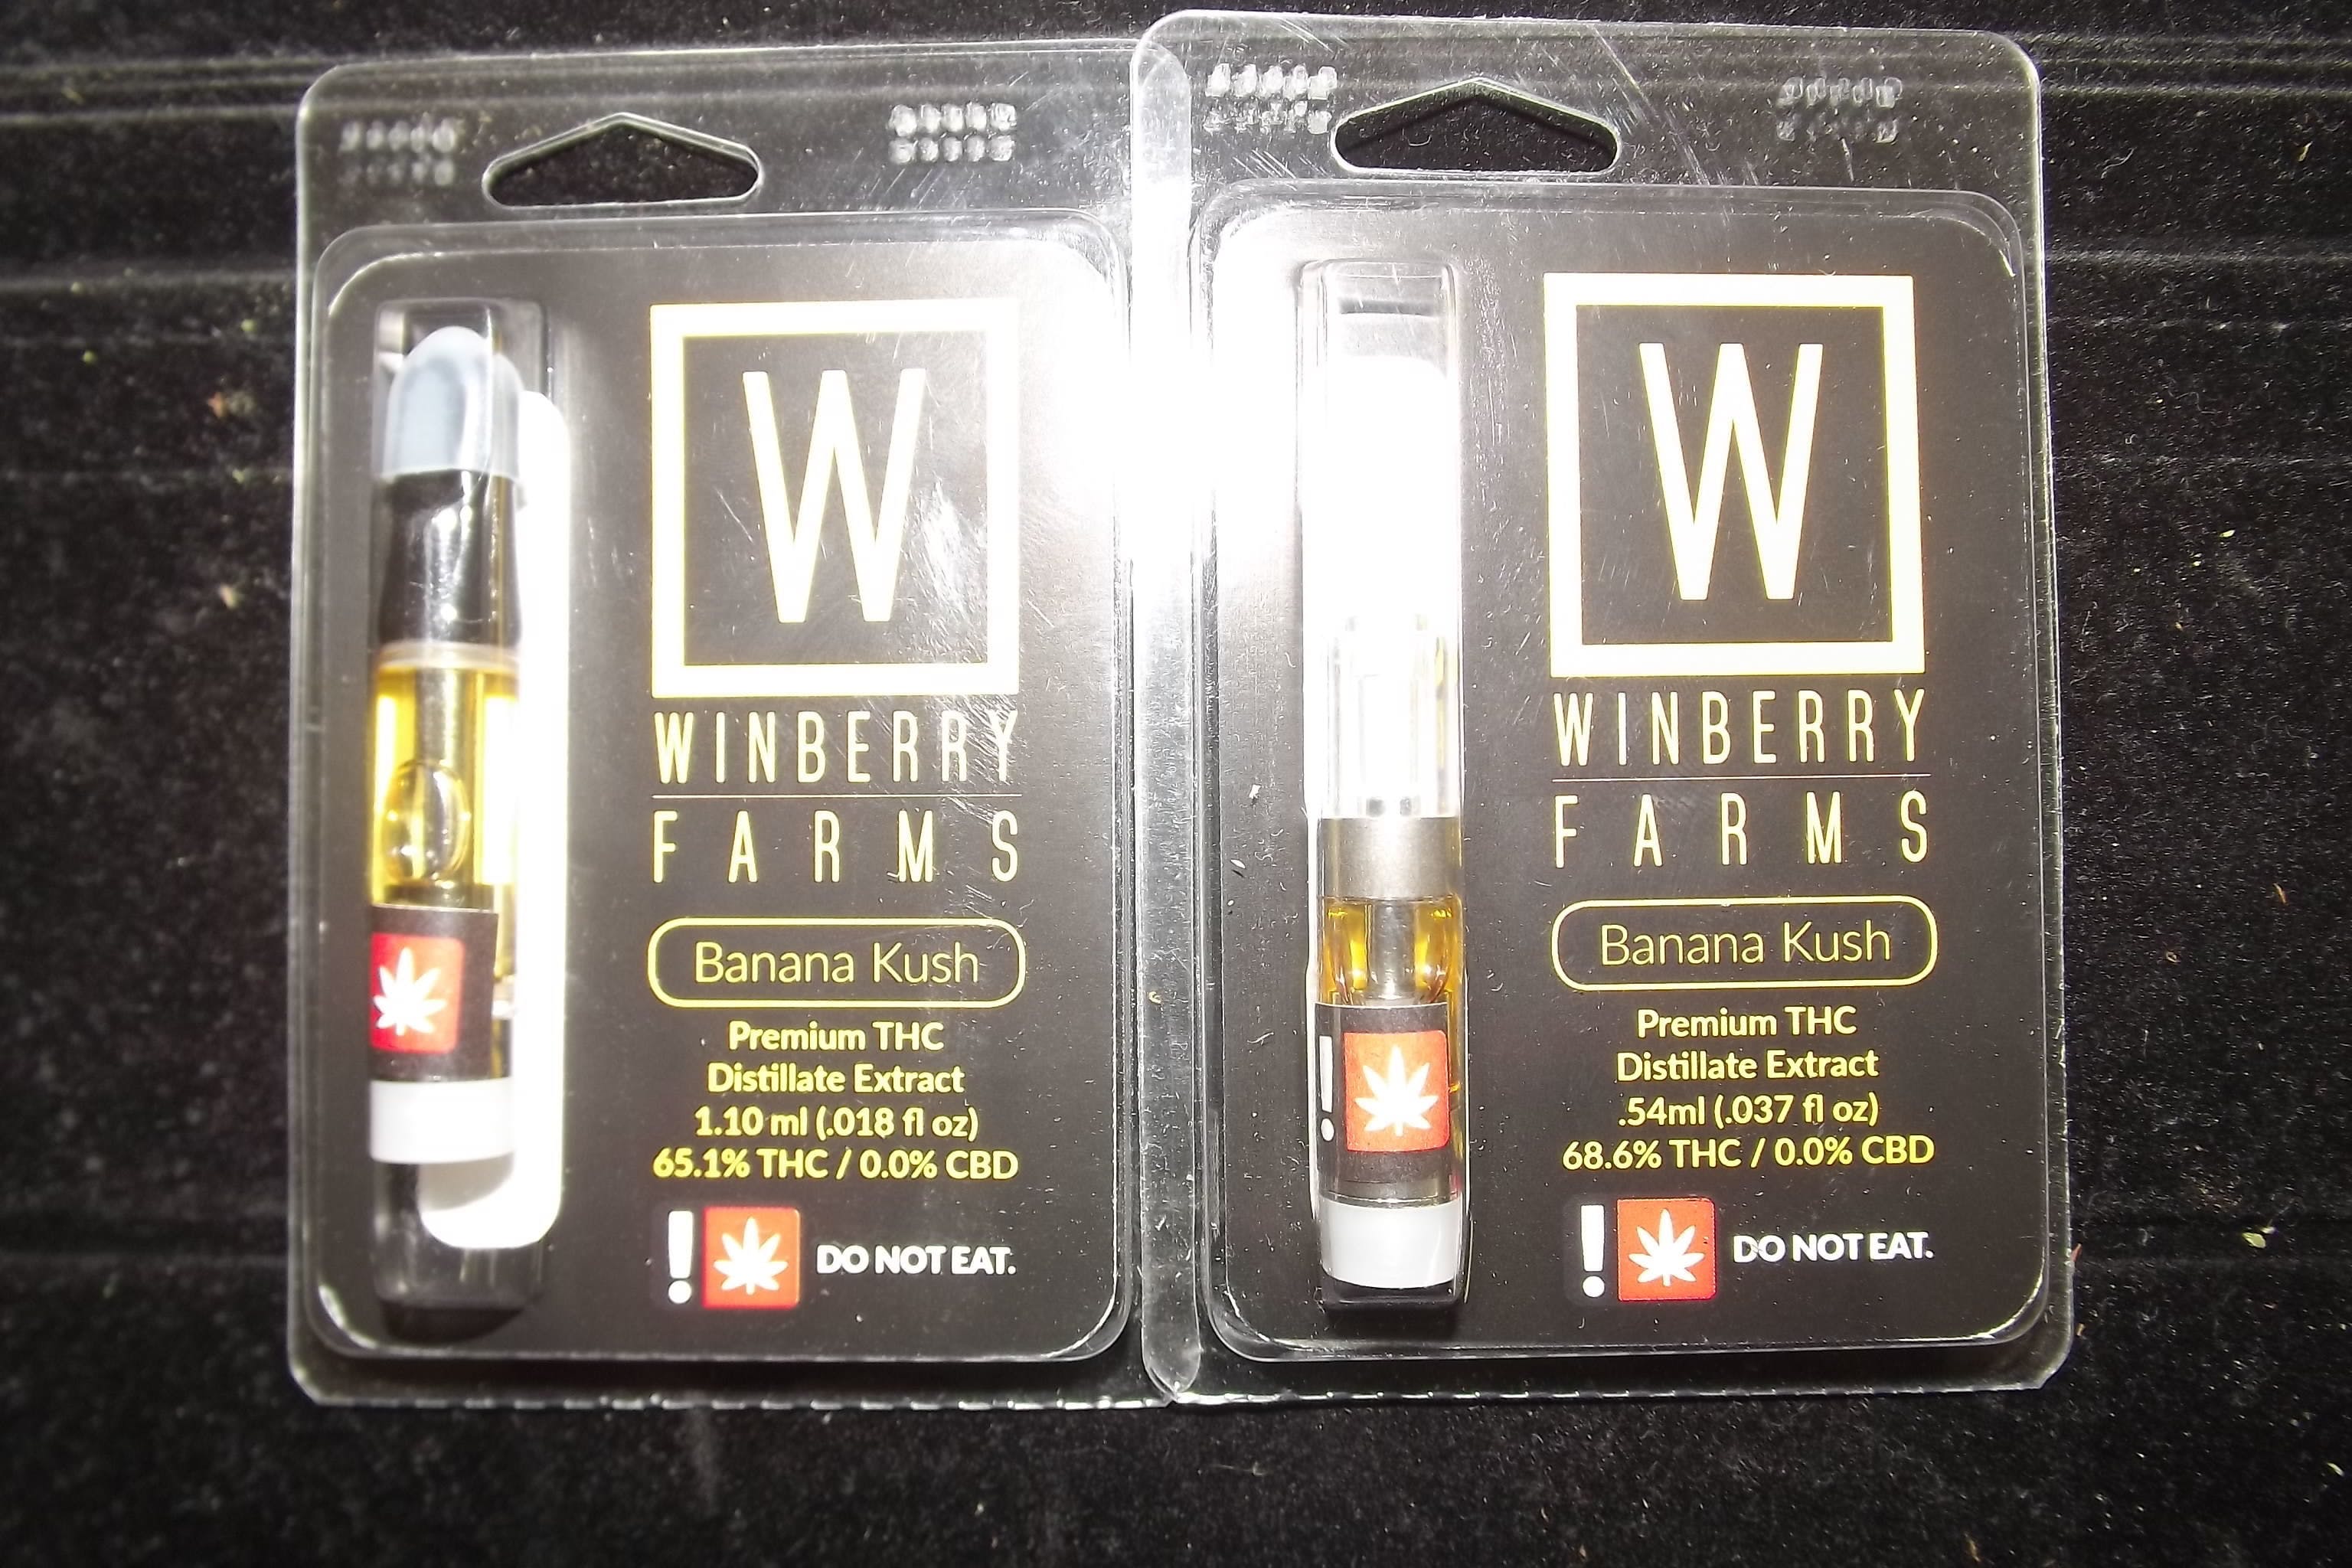 concentrate-winberry-farms-1g-cartridges-11-options-available